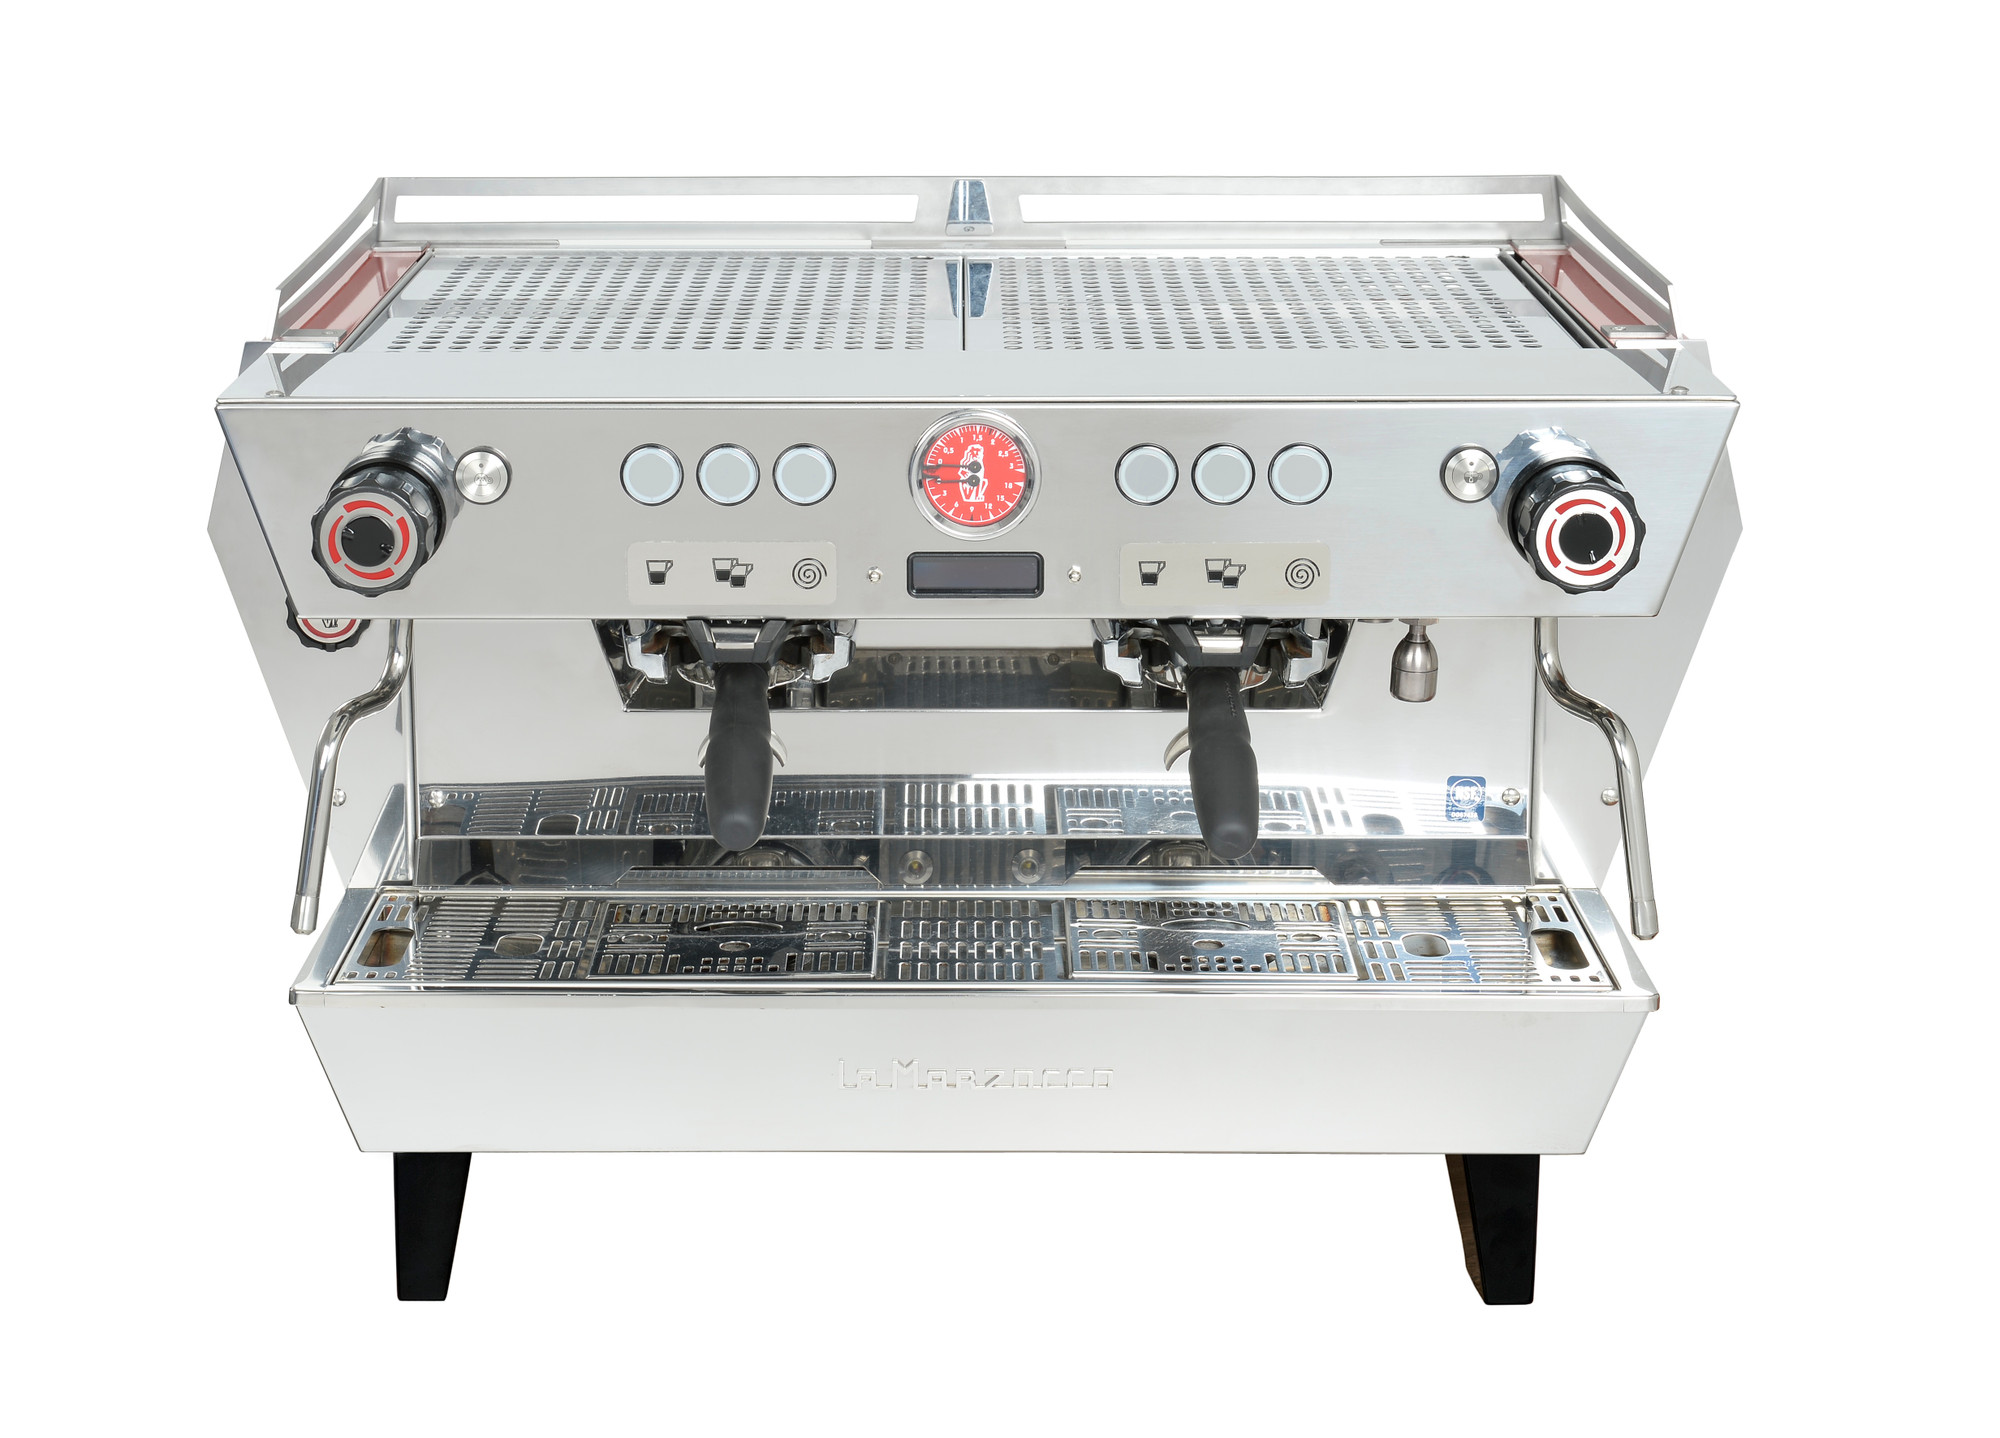 Espresso Dosing Cup By La Marzocco: 4 Great Reasons To Use Today